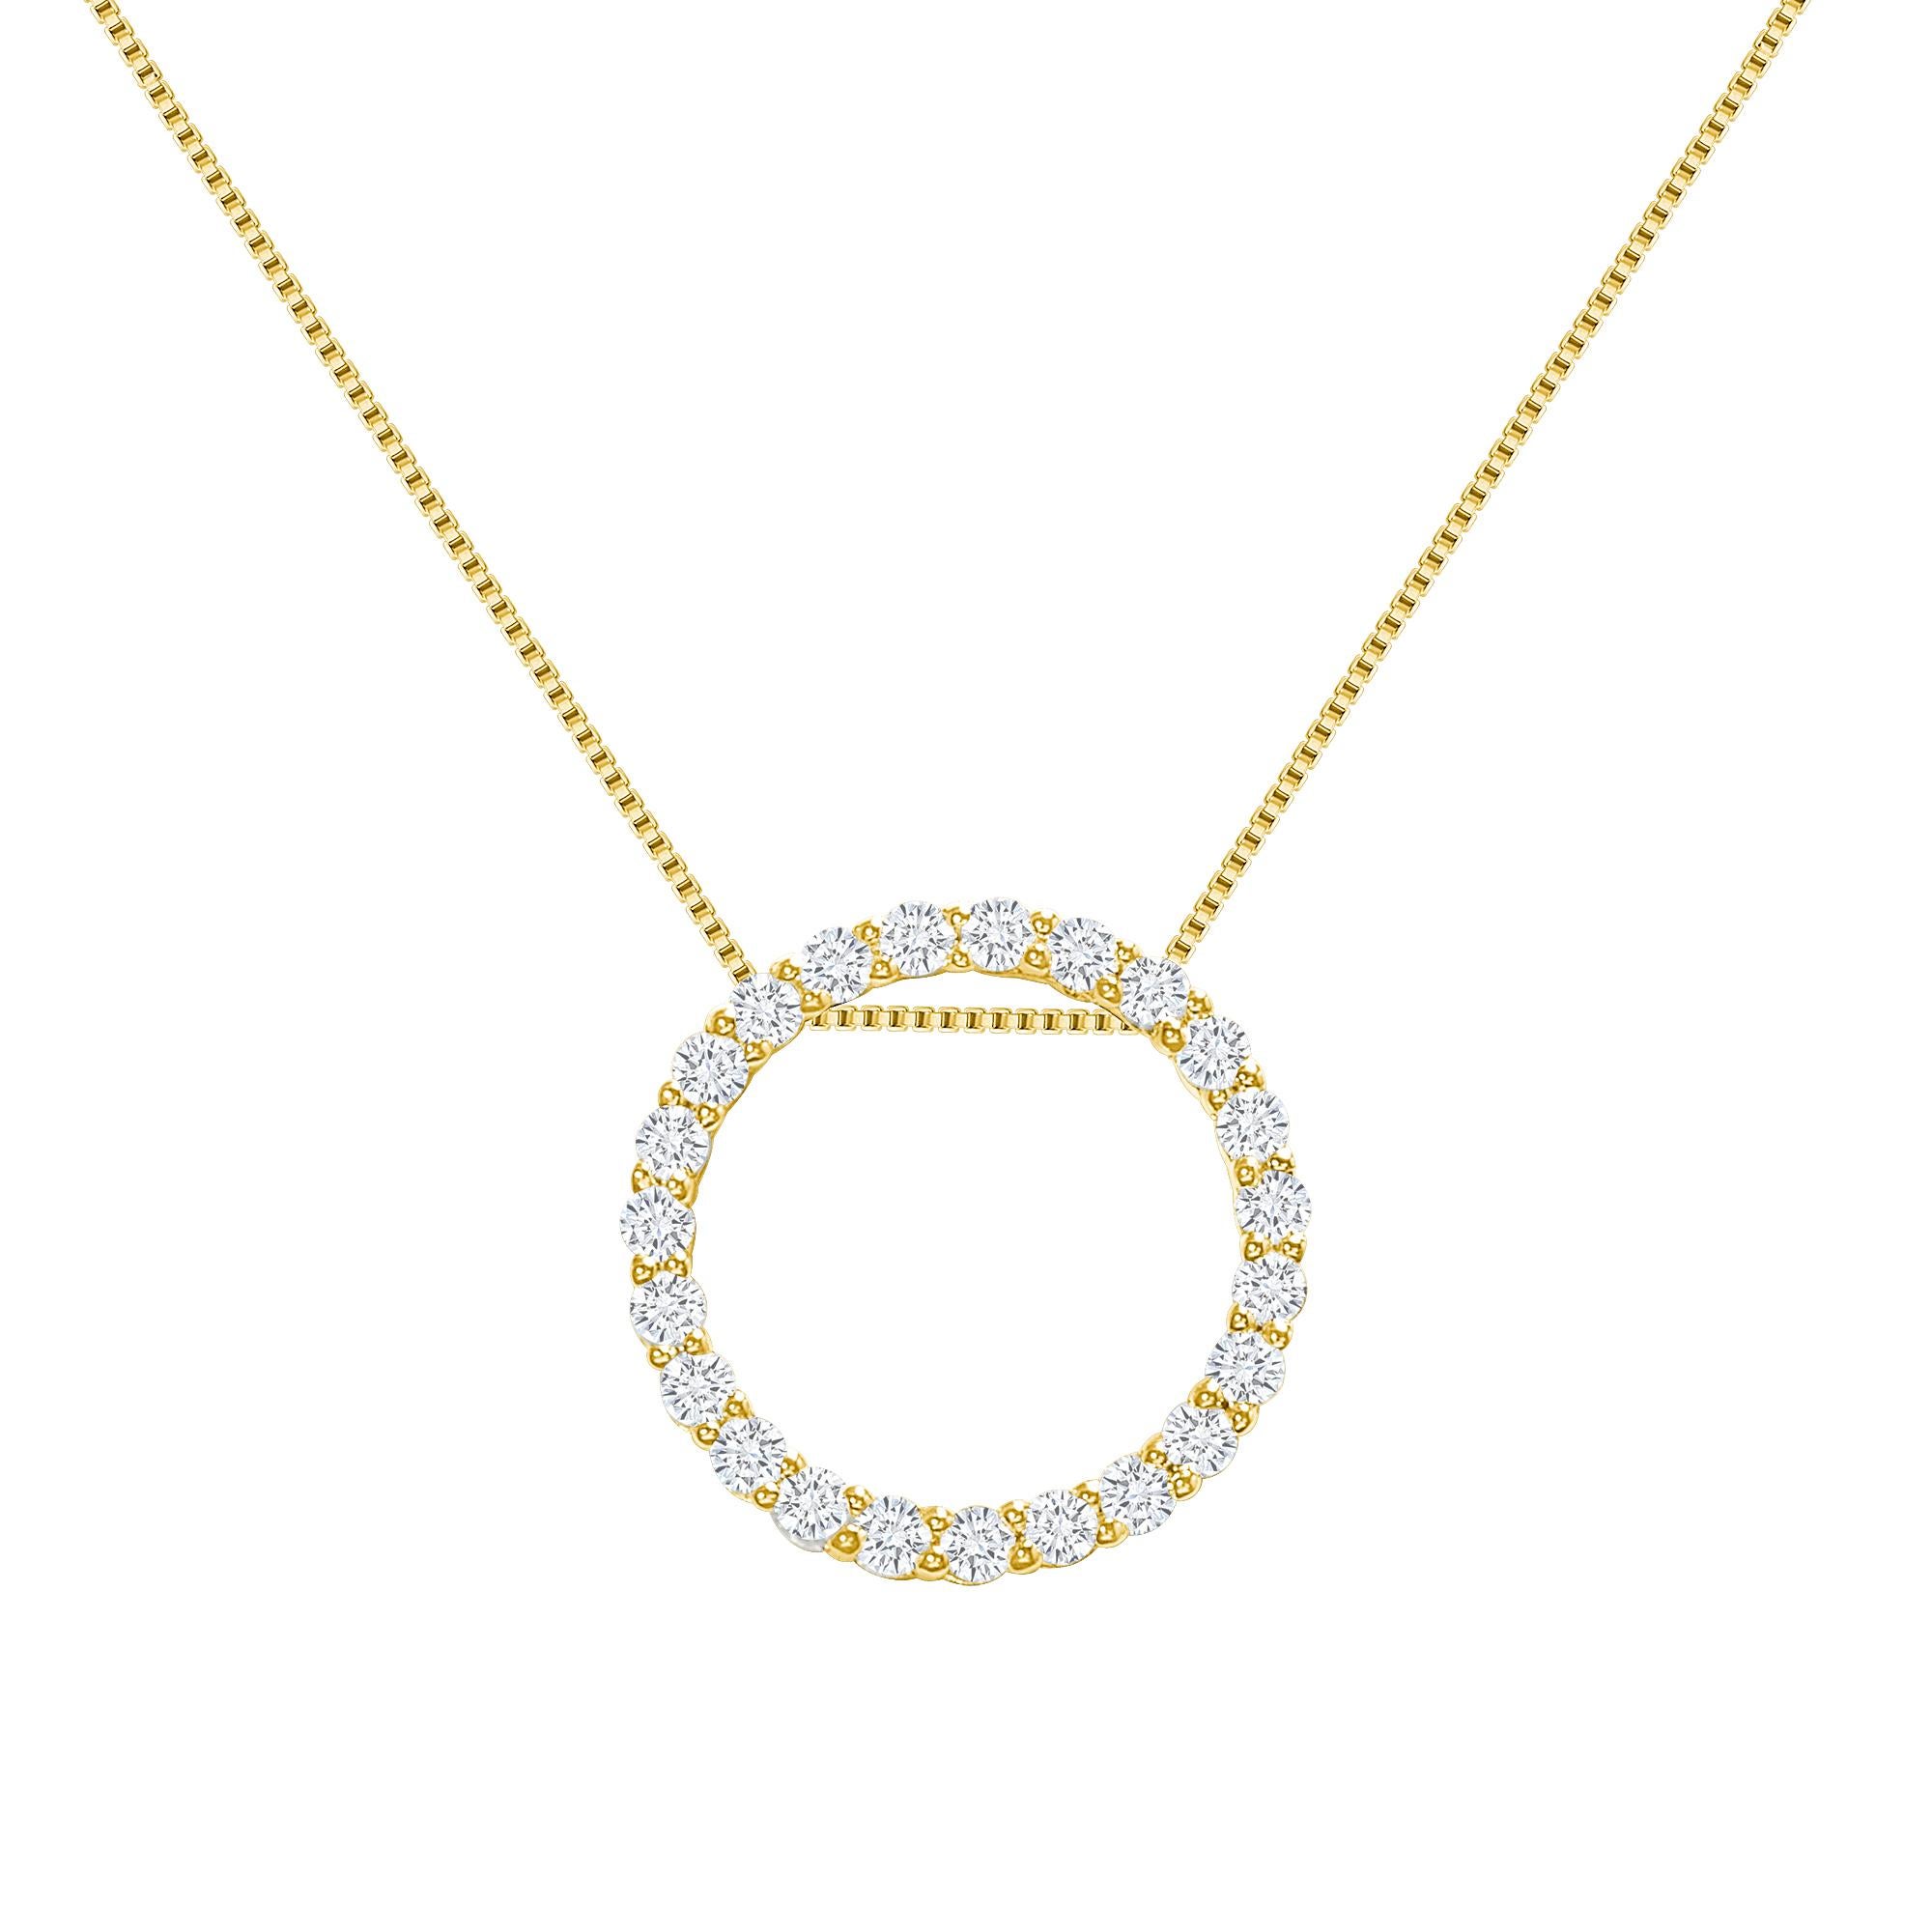 This diamond circle pendant provides a glowing chic look.
Metal: 14k Gold
Diamond Total Carats: 3 carat
Diamond Cut: Round Natural Diamonds (Not Lab Grown)
Diamond Clarity: VS
Diamond Color: F-G
Color: Yellow Gold
Necklace Length: 16 inches